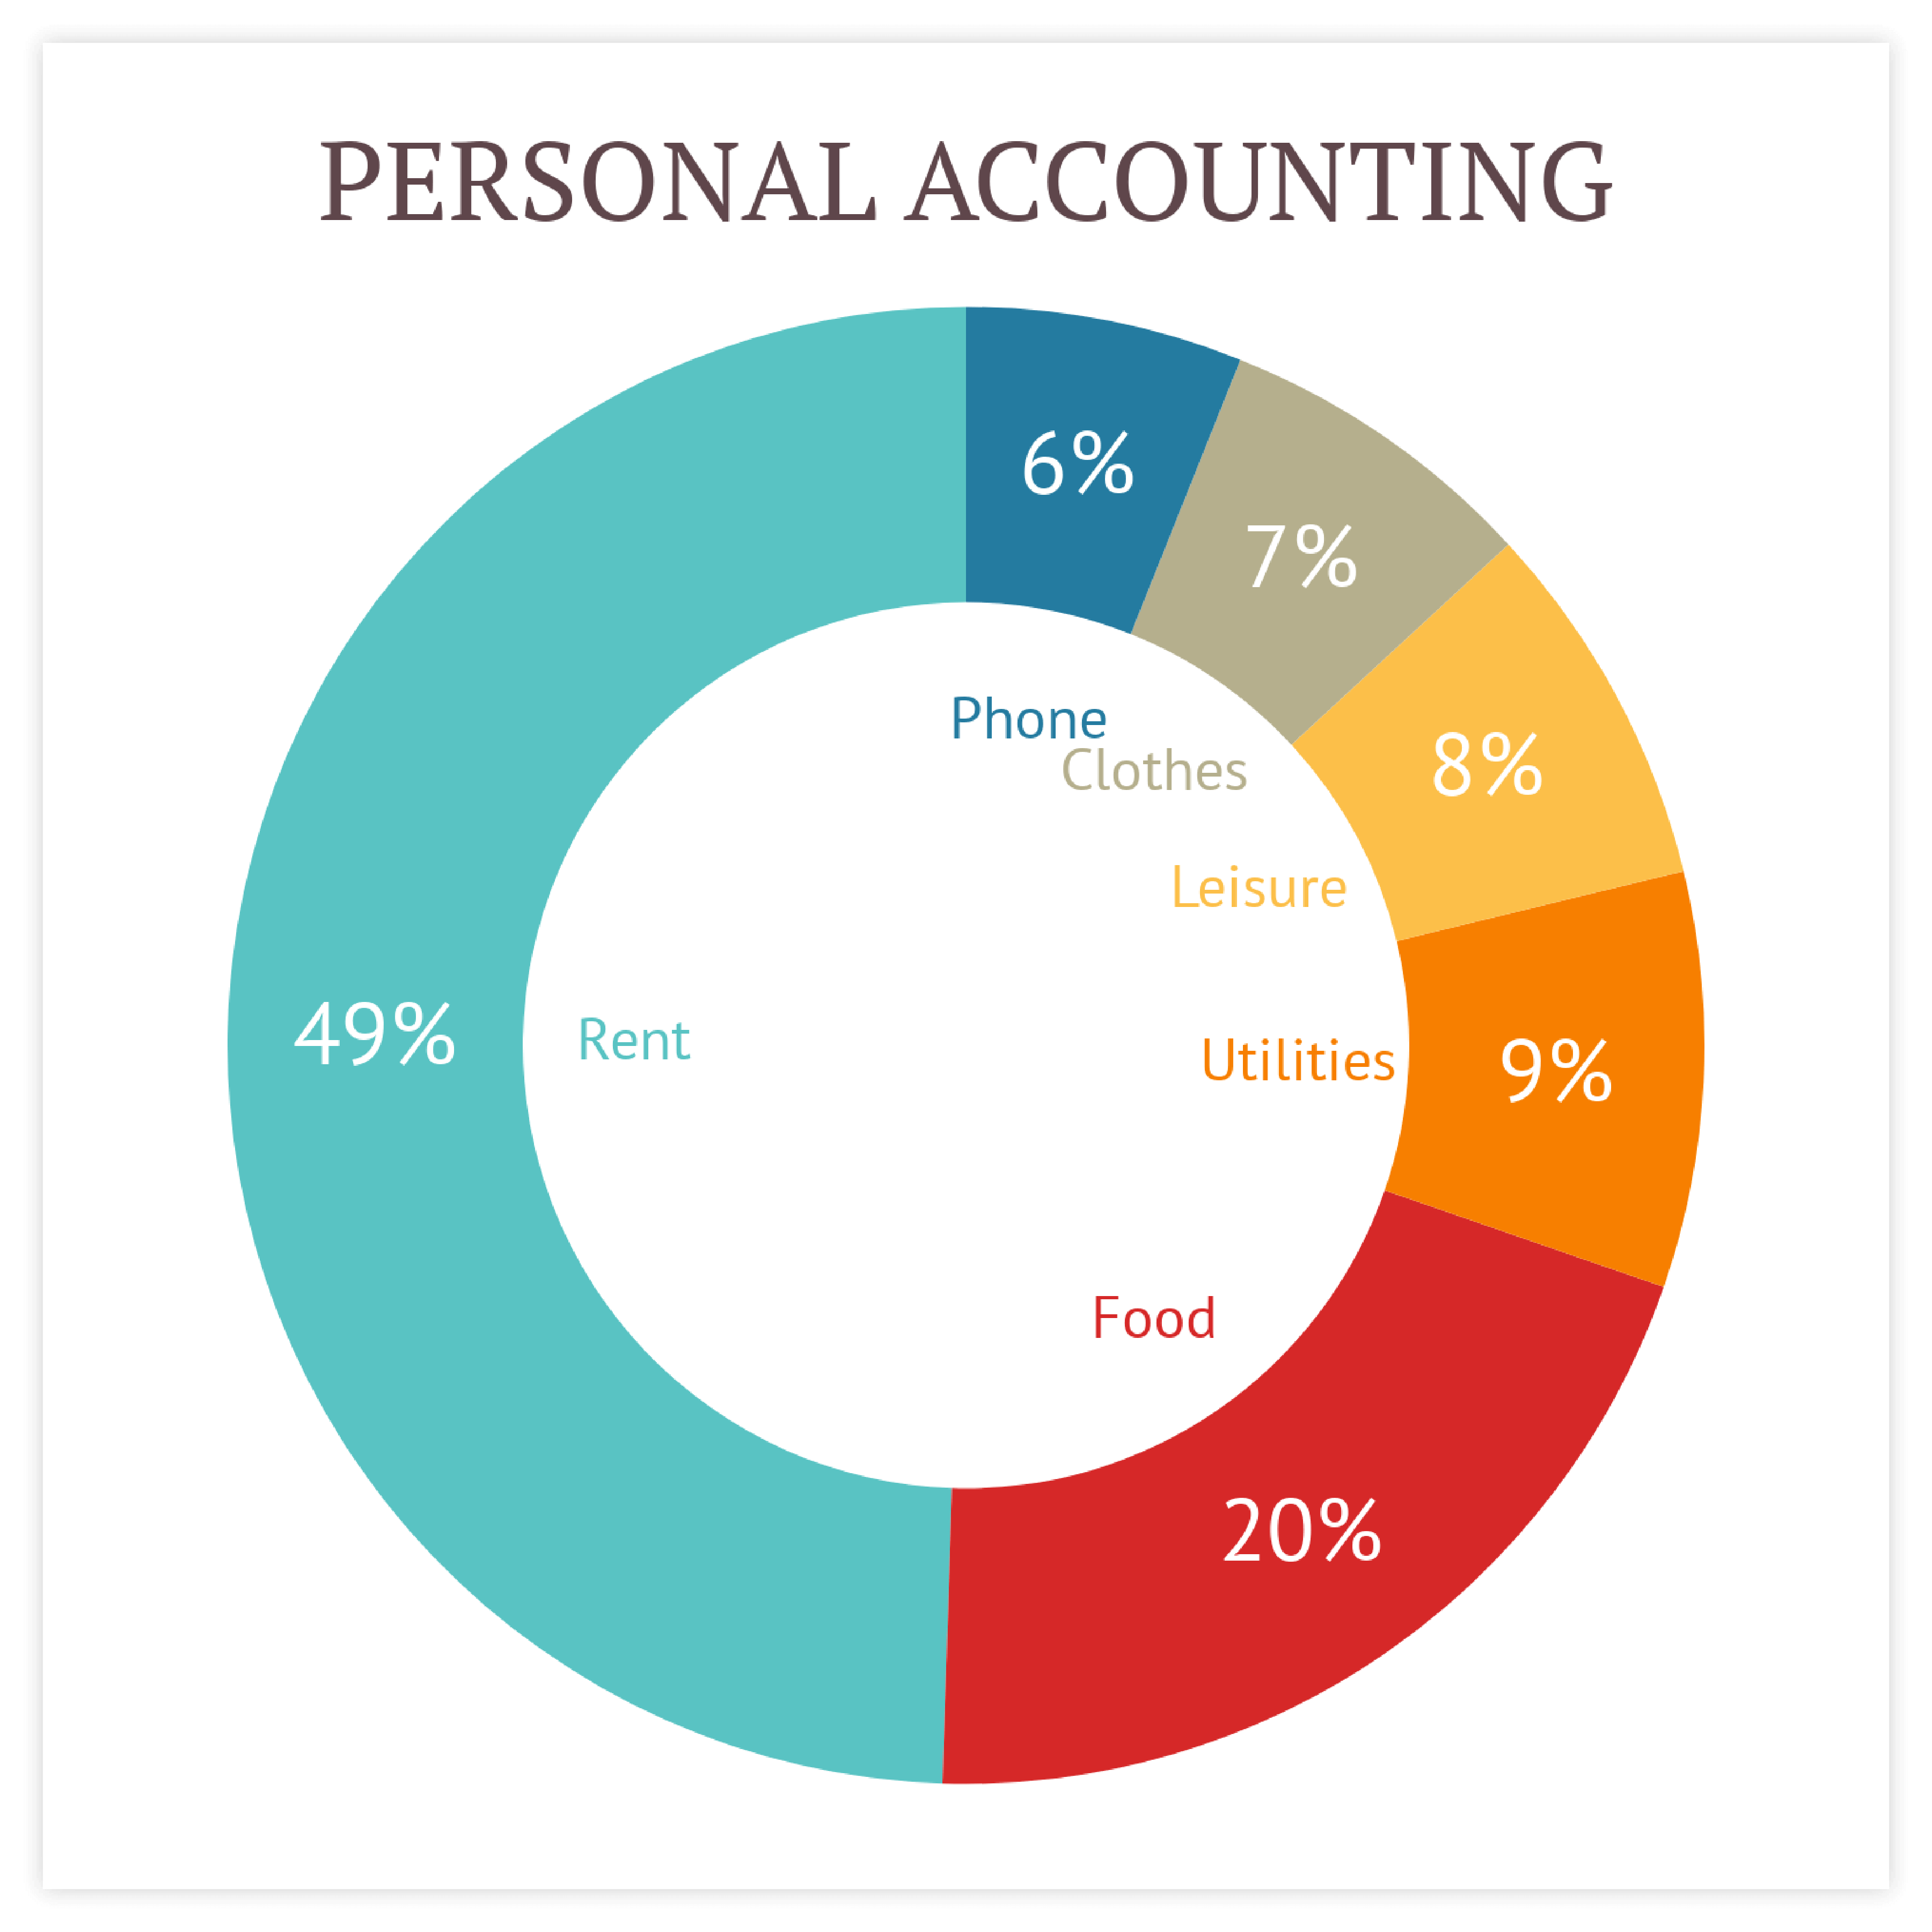 Sample of donut charts - get inspired and use this sample to design your own donut chart!